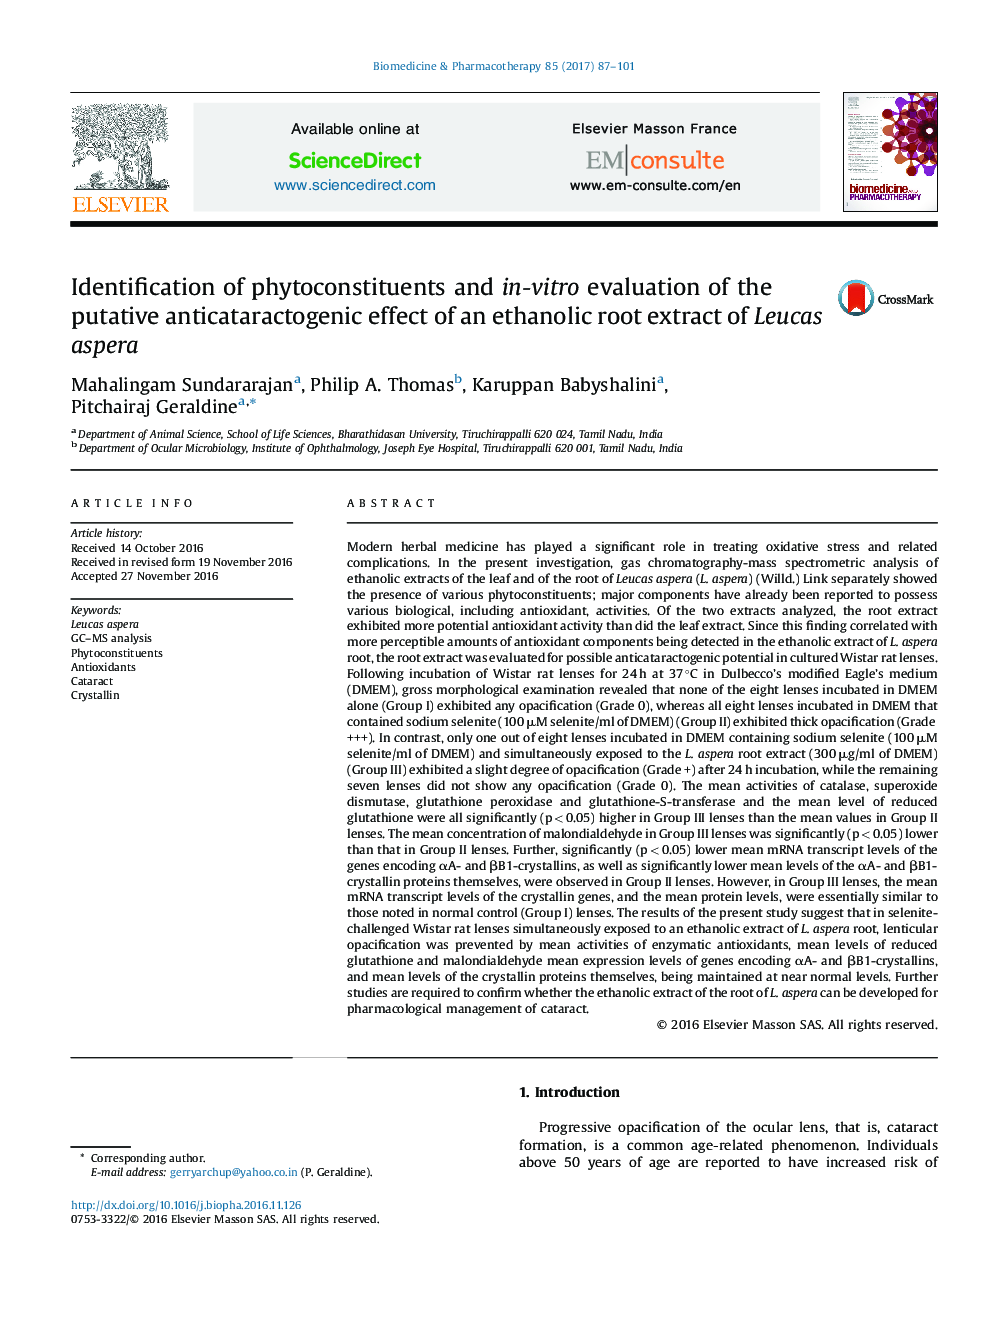 Identification of phytoconstituents and in-vitro evaluation of the putative anticataractogenic effect of an ethanolic root extract of Leucas aspera